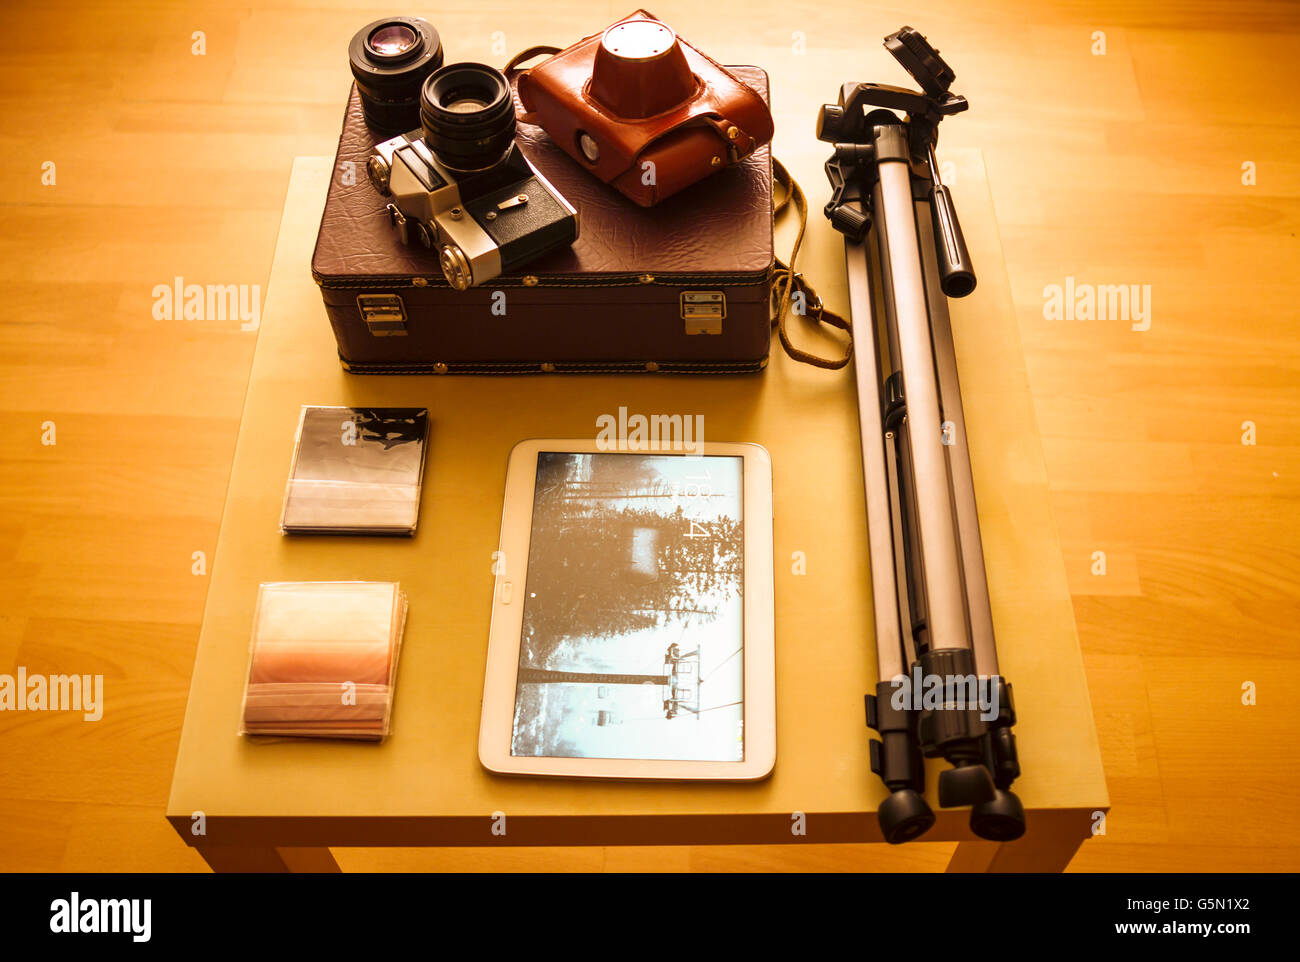 Camera equipment and digital tablet on table Stock Photo